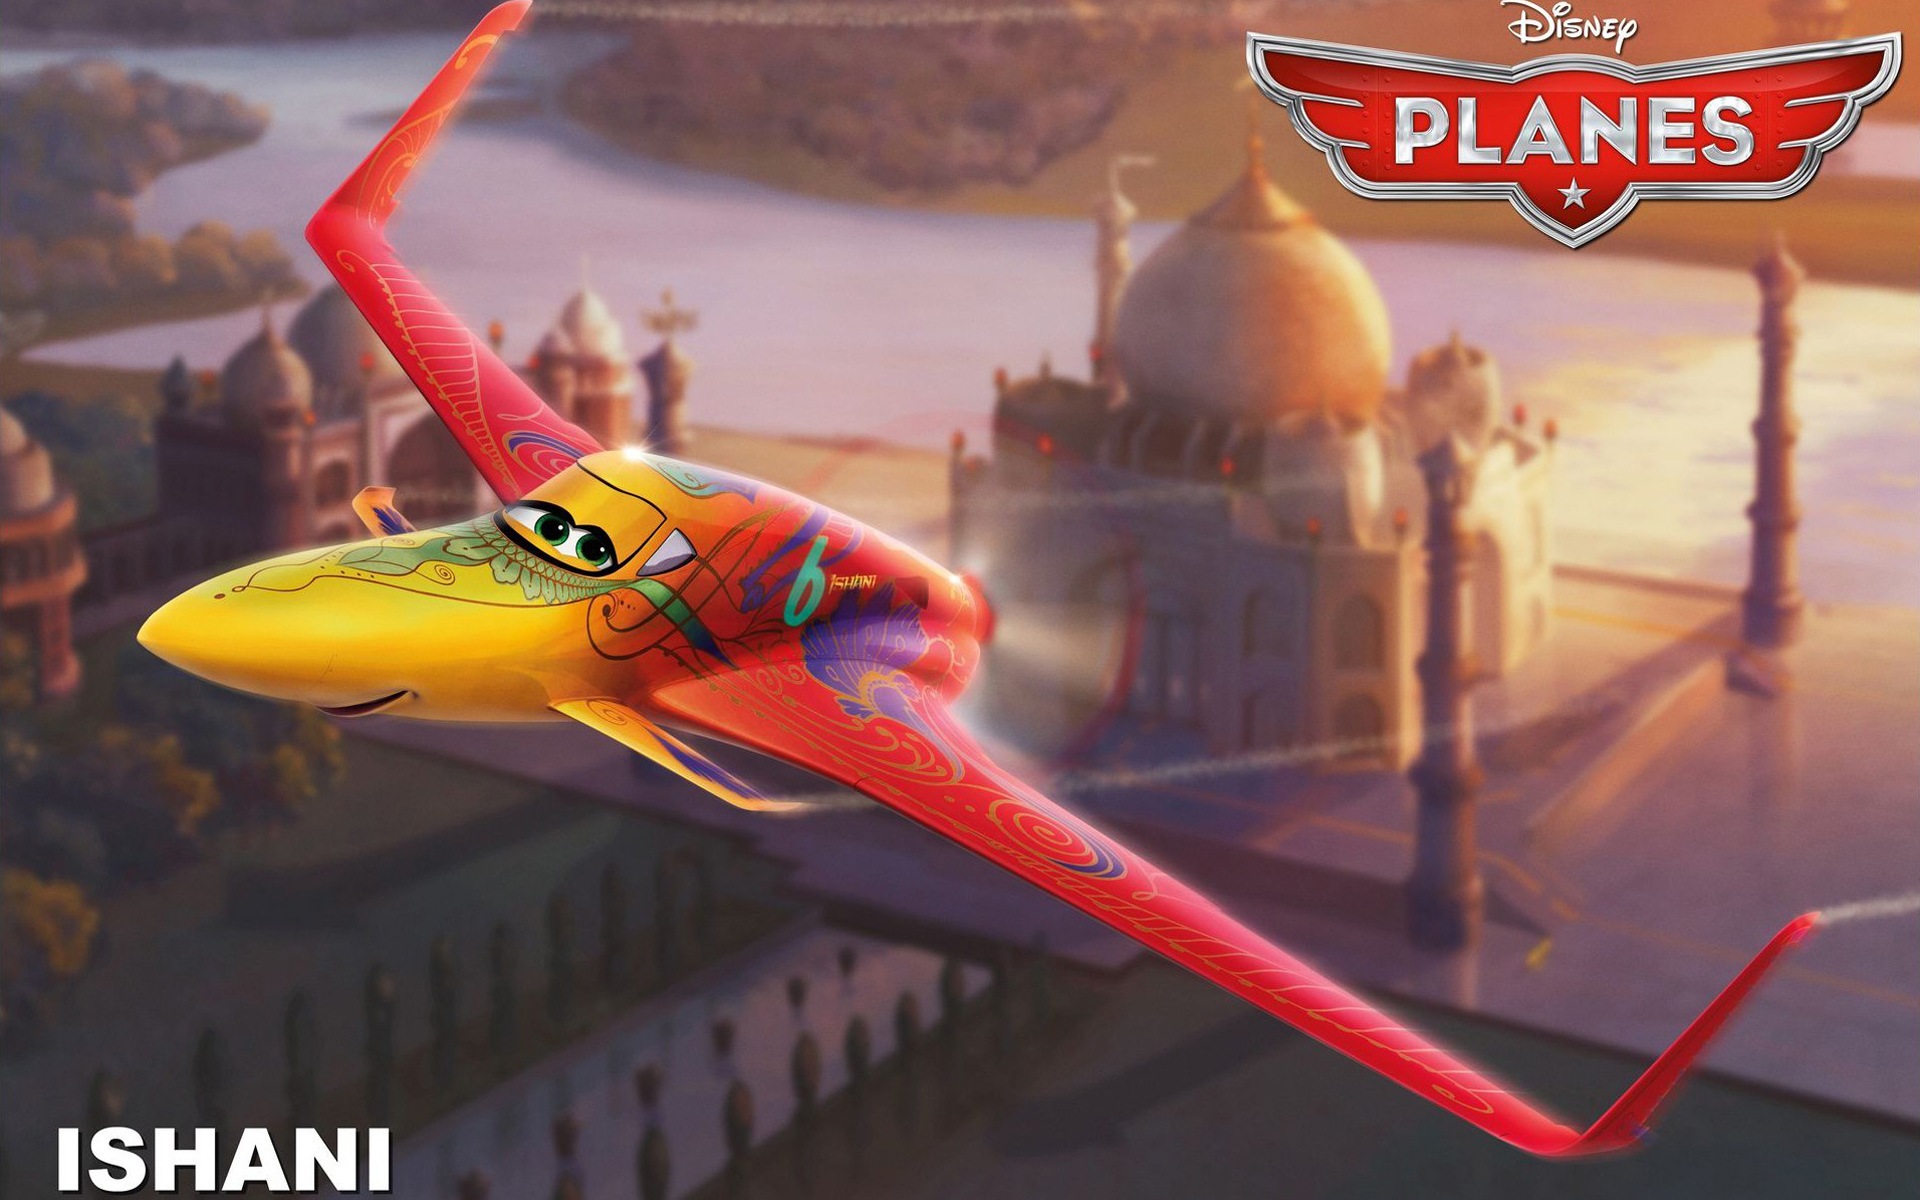 Planes 2013 HD wallpapers #1 - 1920x1200